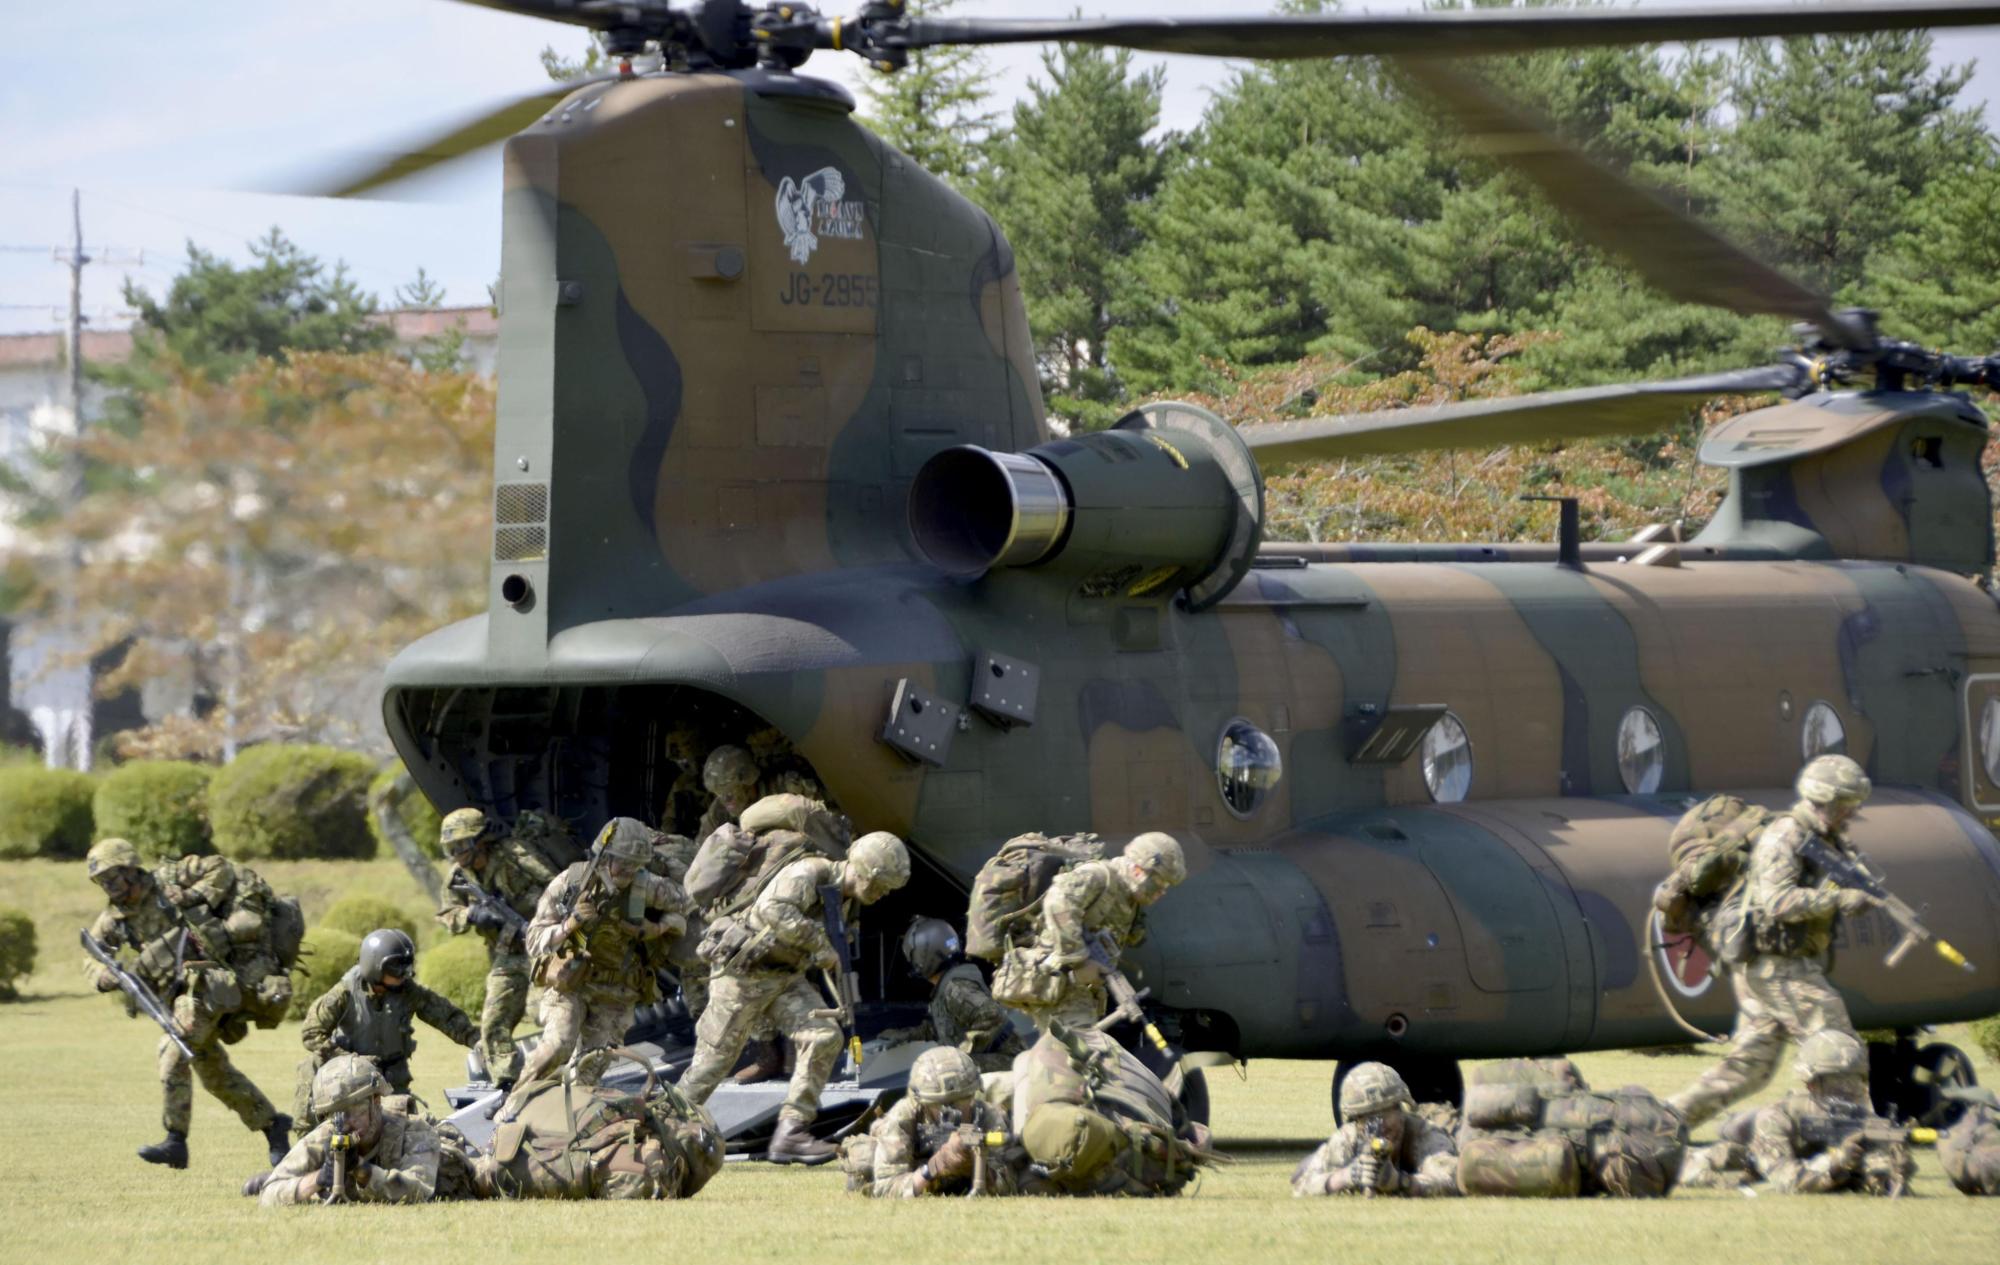 Ground Self-Defense Force and British Army personnel disembark a helicopter during a joint drill at the GSDF's training school in Shizuoka Prefecture on Tuesday. | KYODO